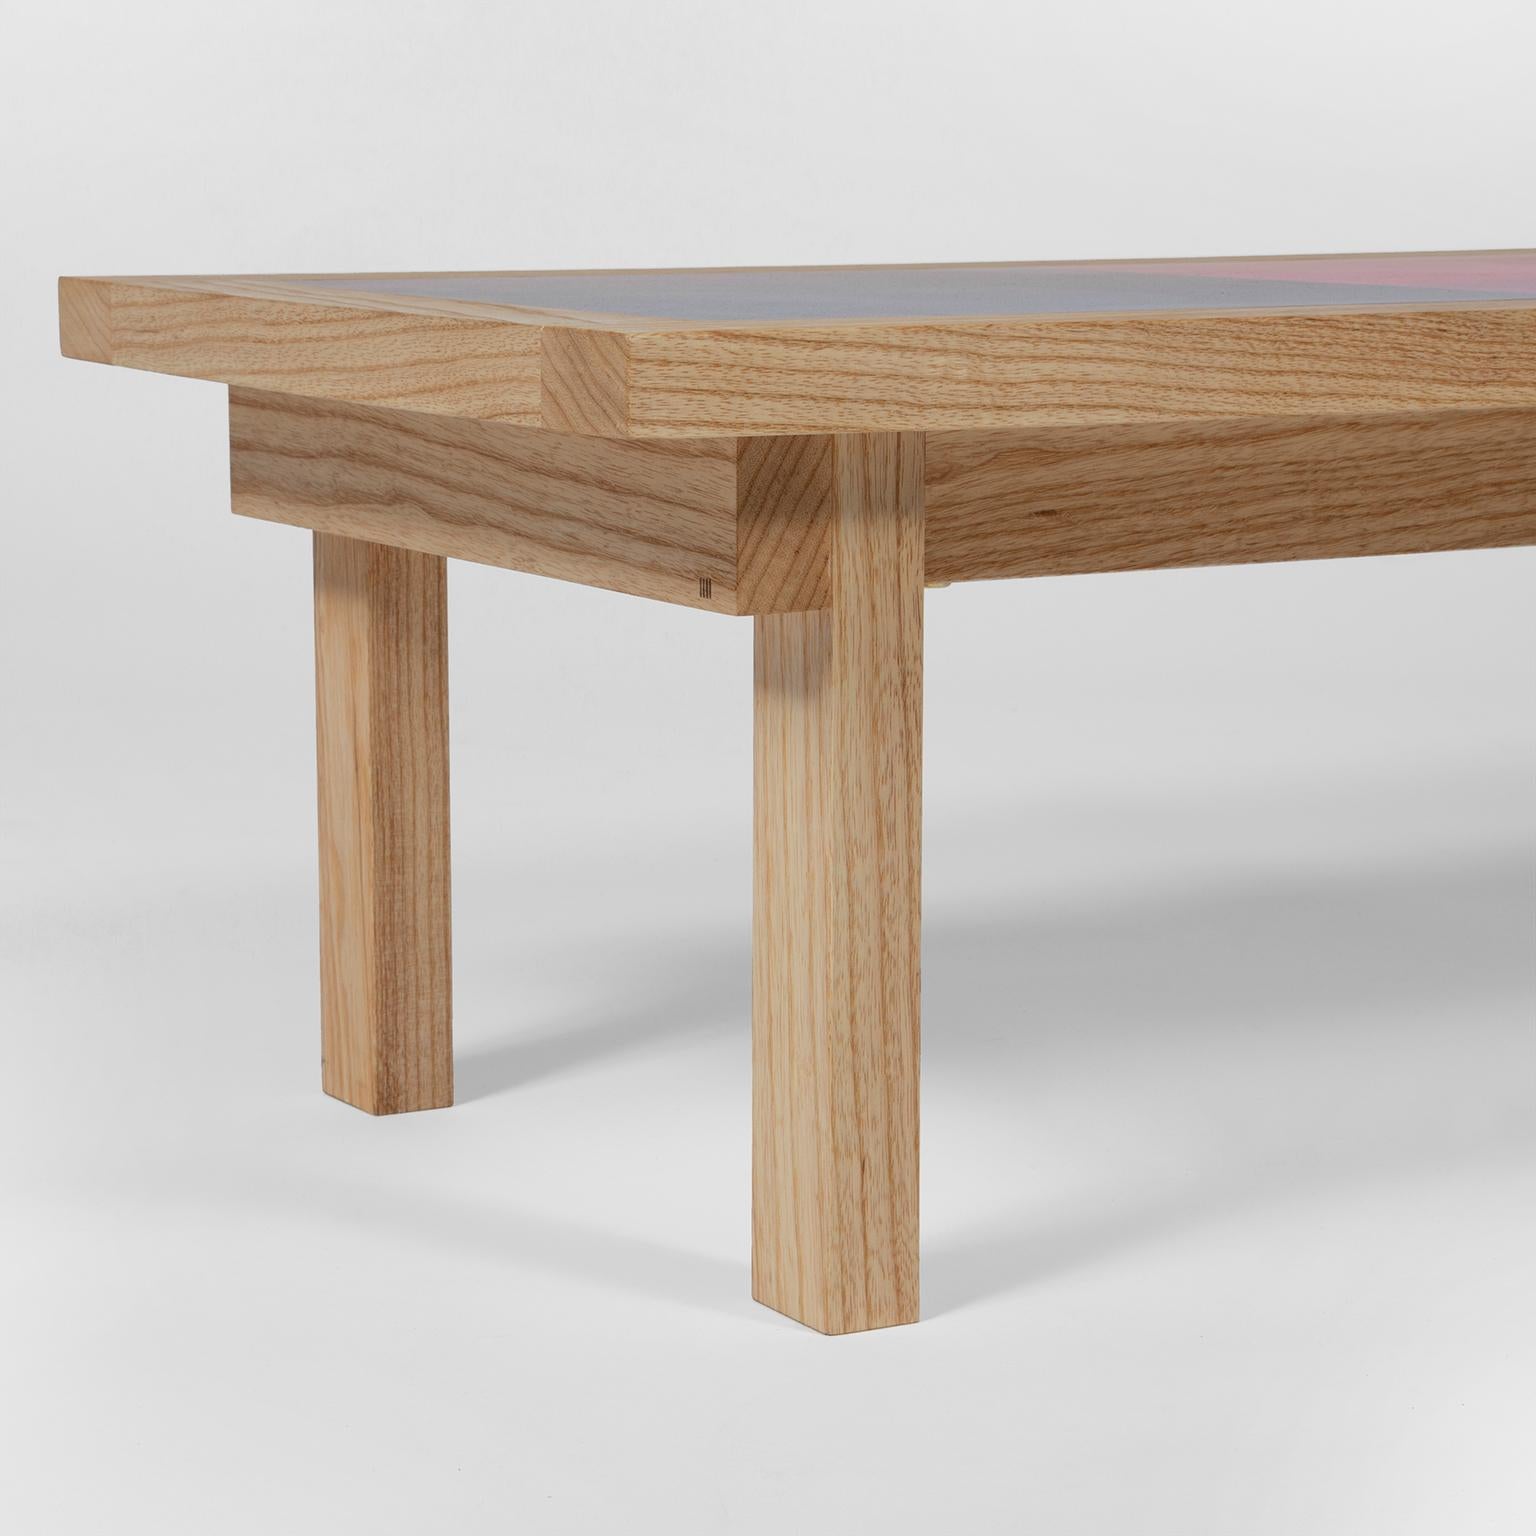 Hand-Crafted Nine Colored Blocks Table by DANAD Design 'Robyn Denny' For Sale